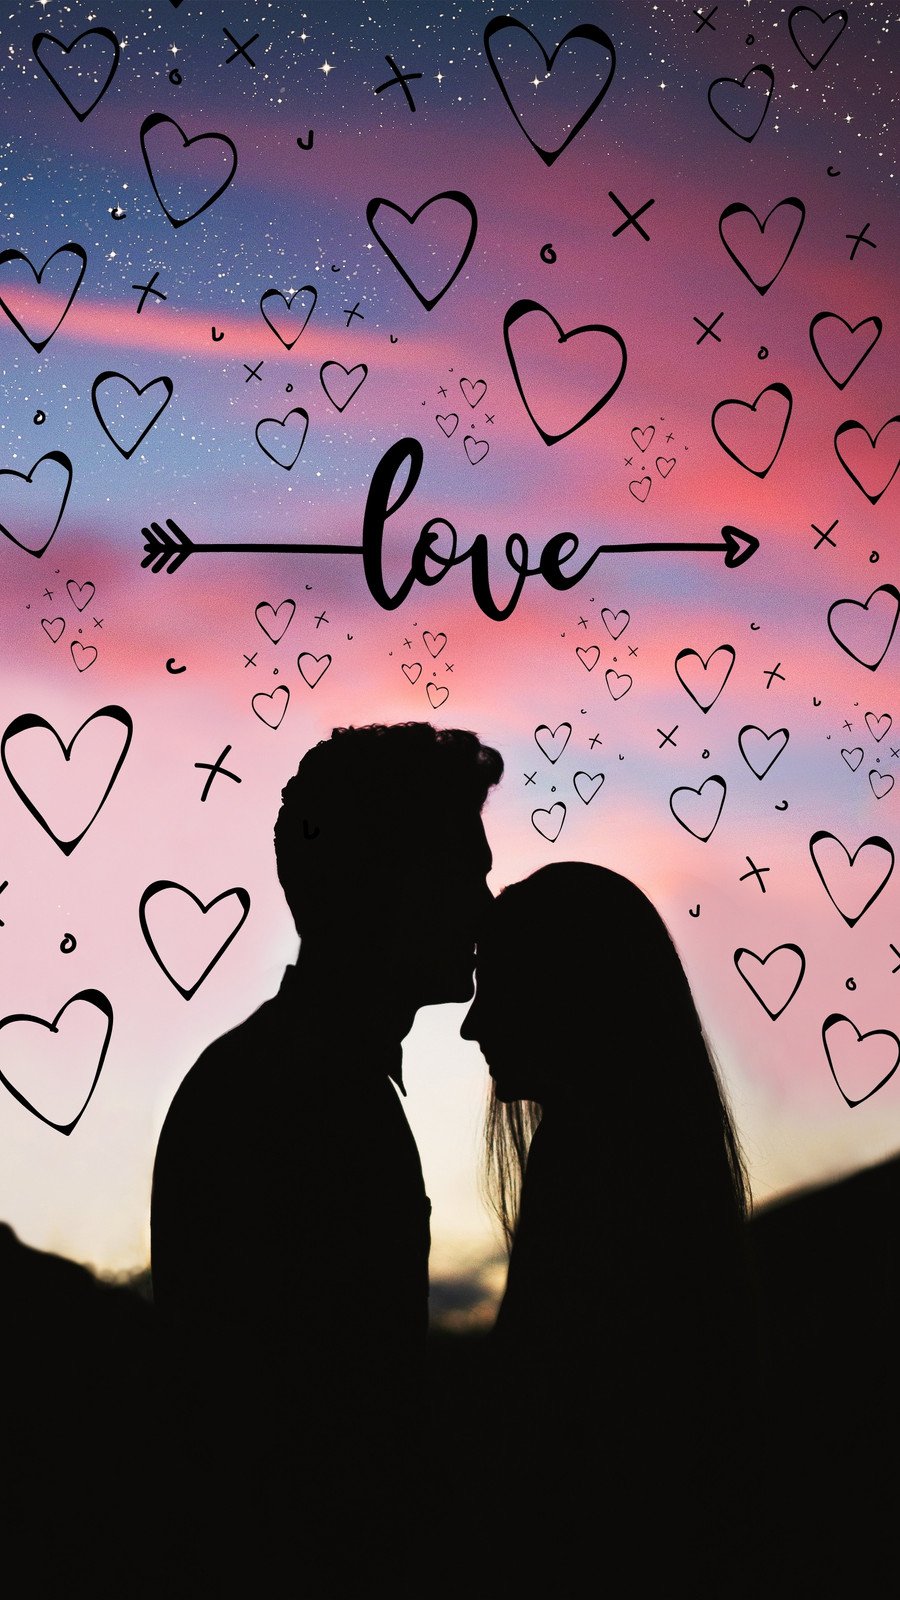 Free and customizable heart background templates